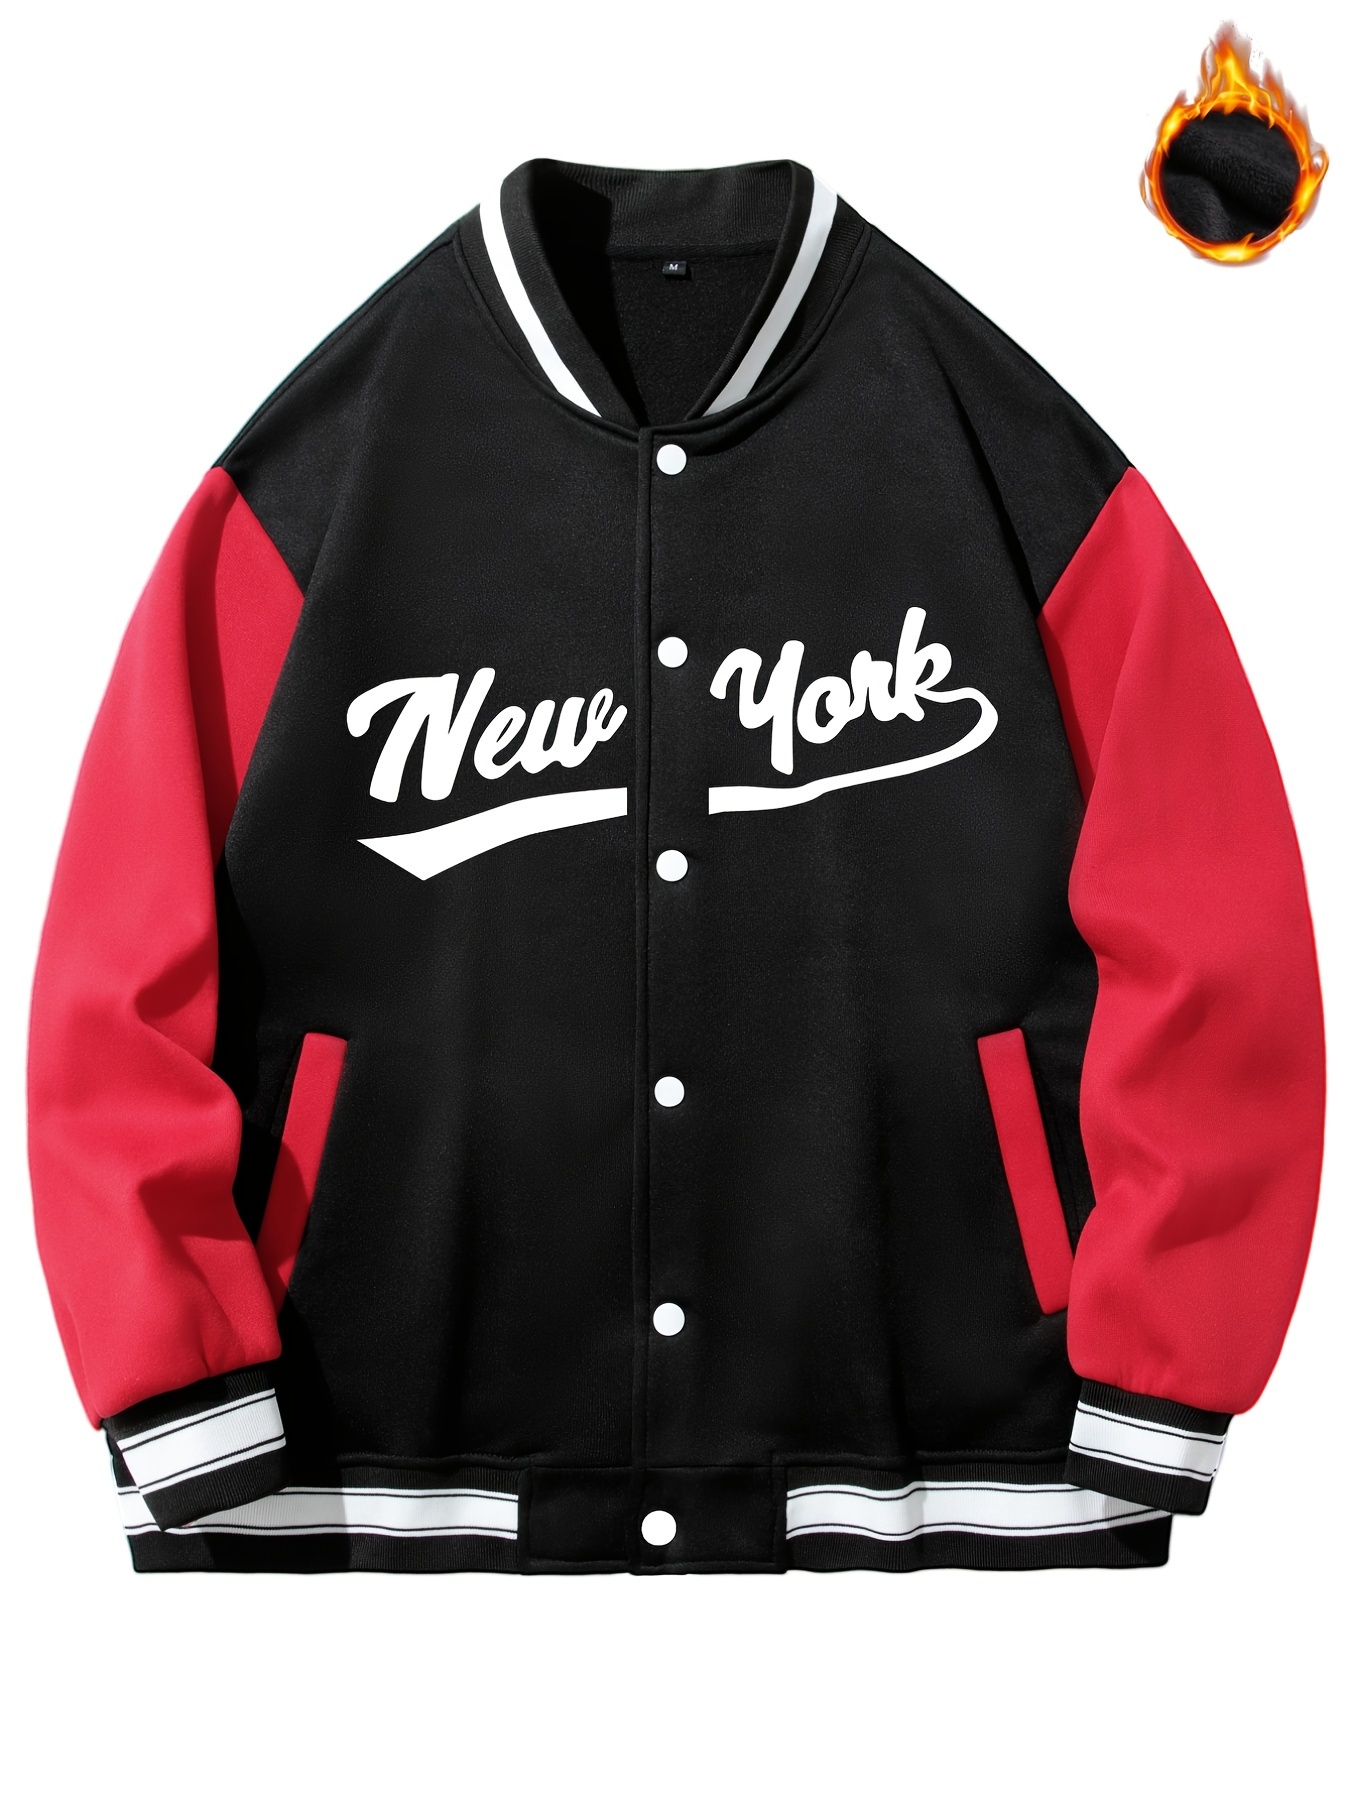 Fleece Lightweight Baseball Collar Varsity Jackets, Men's Letter Graphic Pocket Print Trendy Color Block Thermal Outerwear Clothes Fall Winter